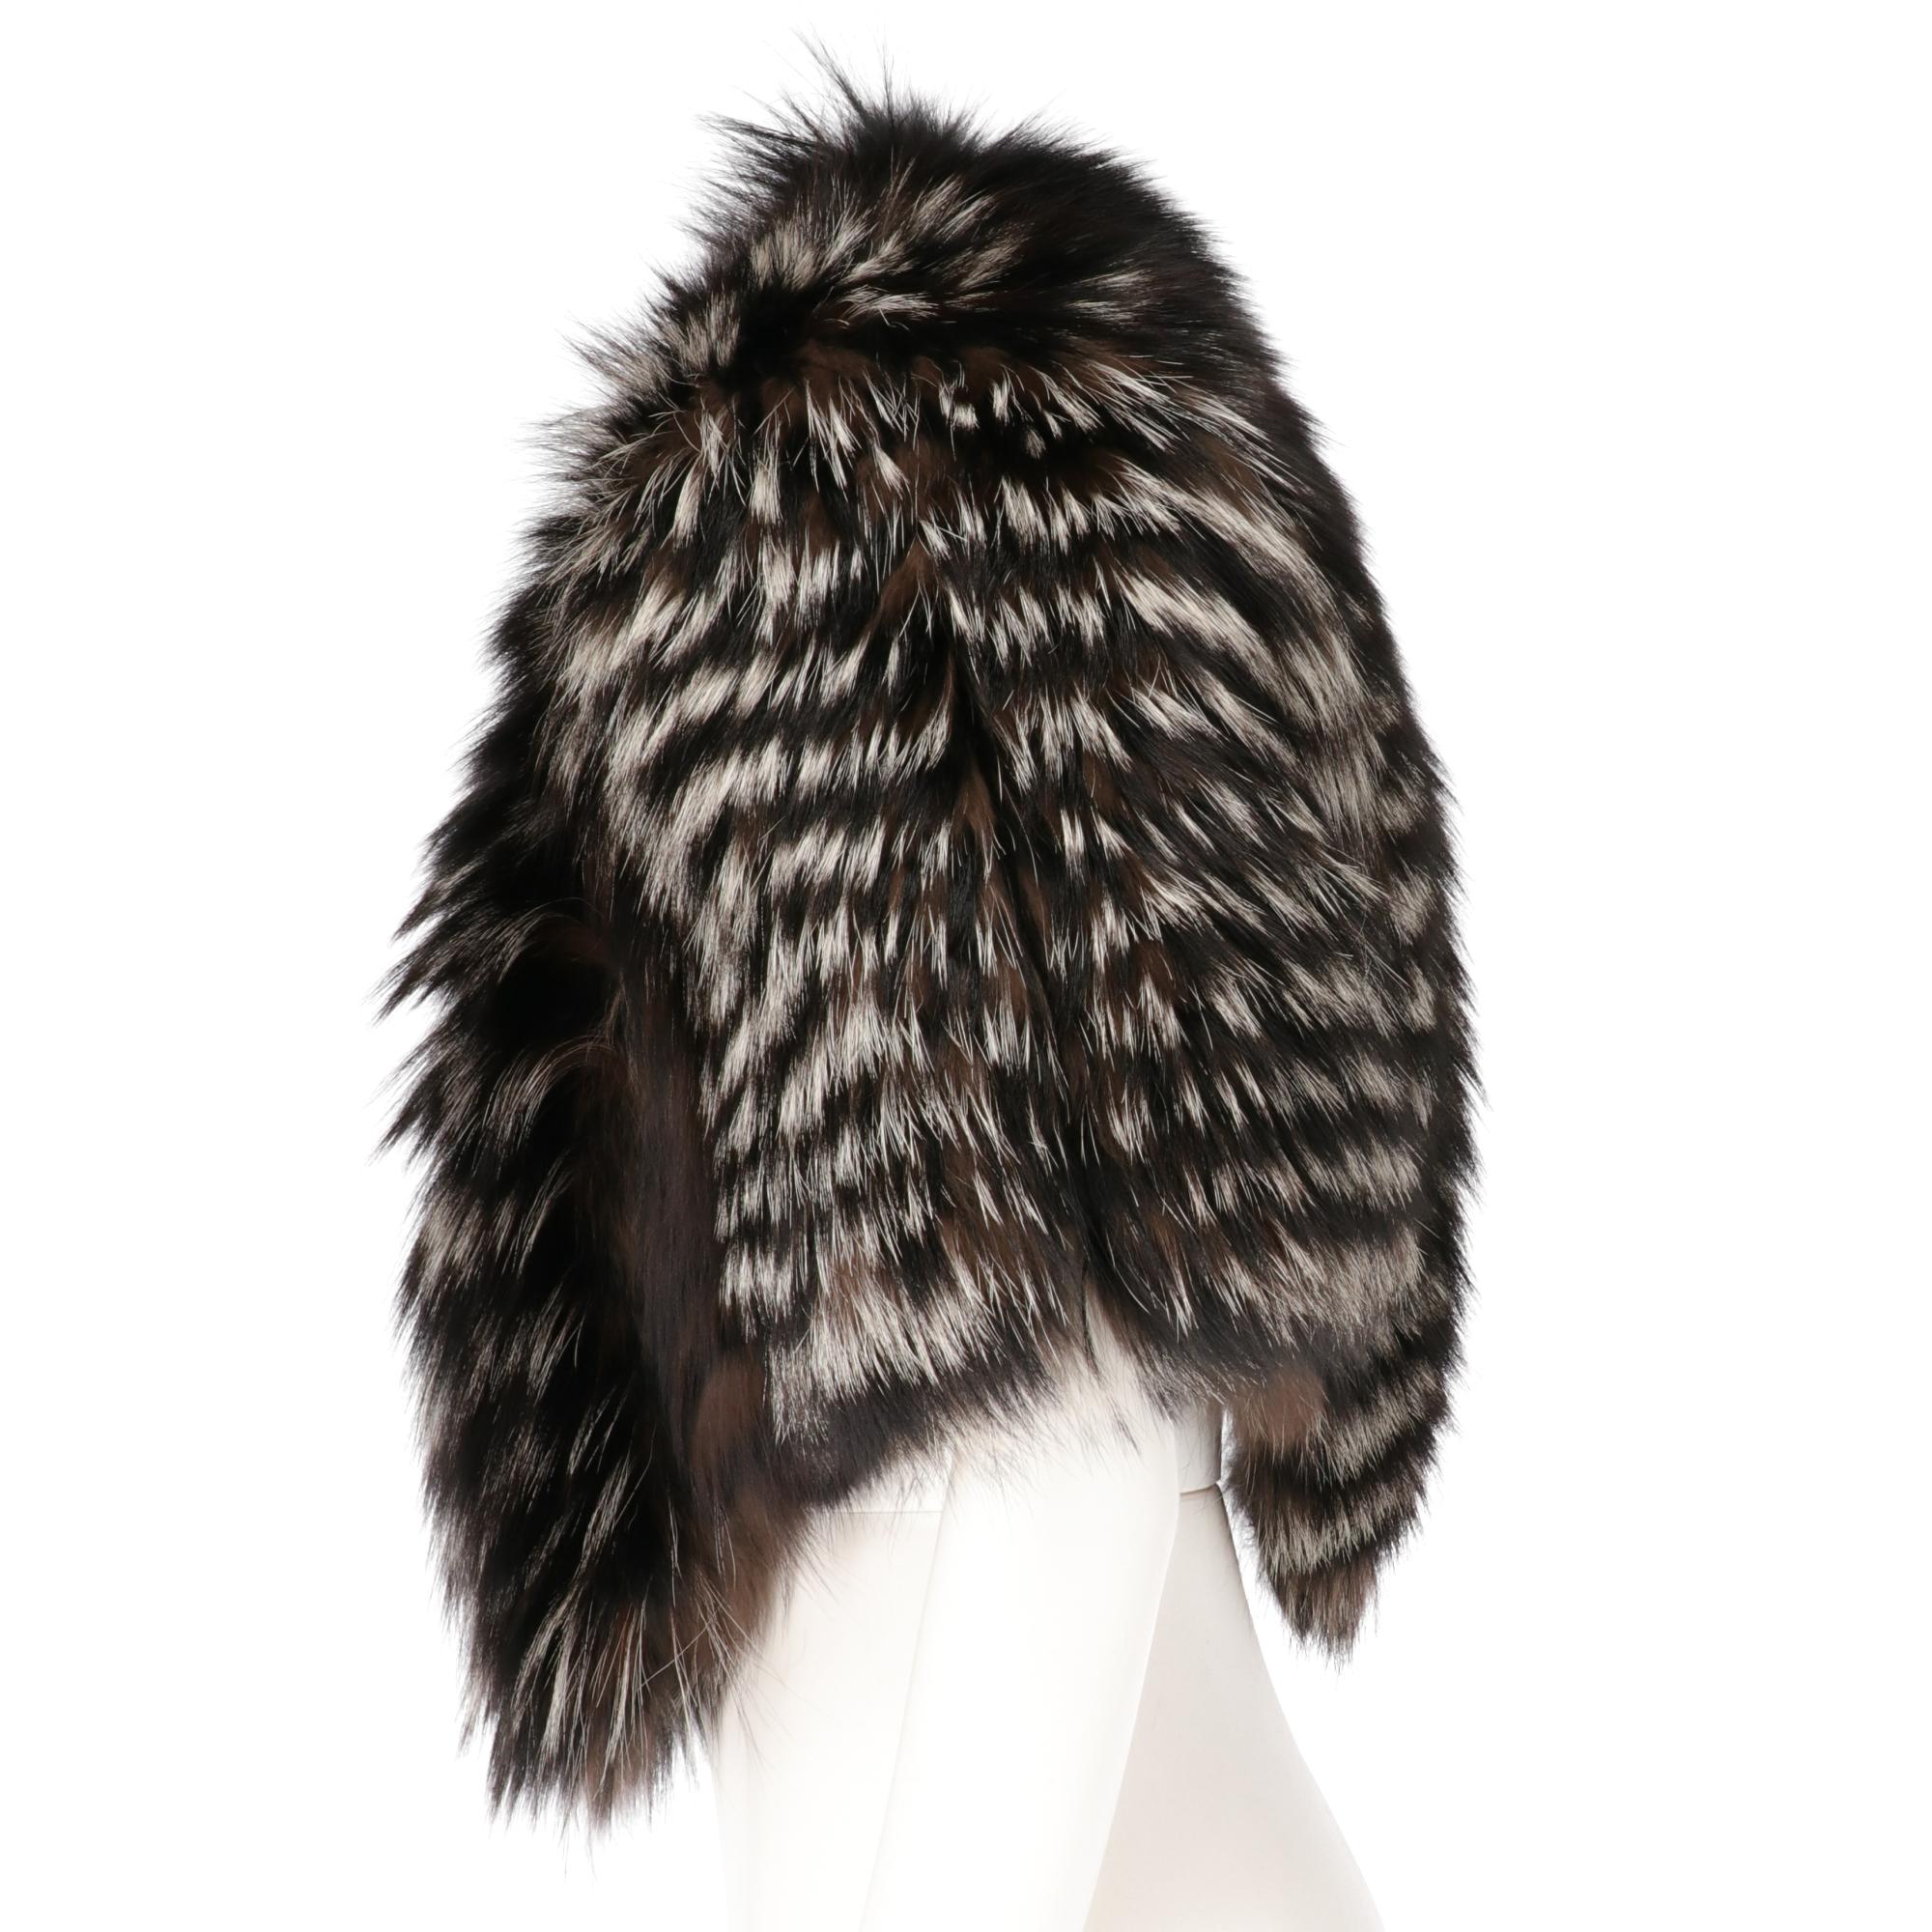 Gianfranco Ferrè real silver fox fur cape short to the waist, with black and white inlay, with padded shoulders, elastics and hooks for the arms, lined in silk, front closure with hook and chain.

This item belongs to an original vintage stock: it